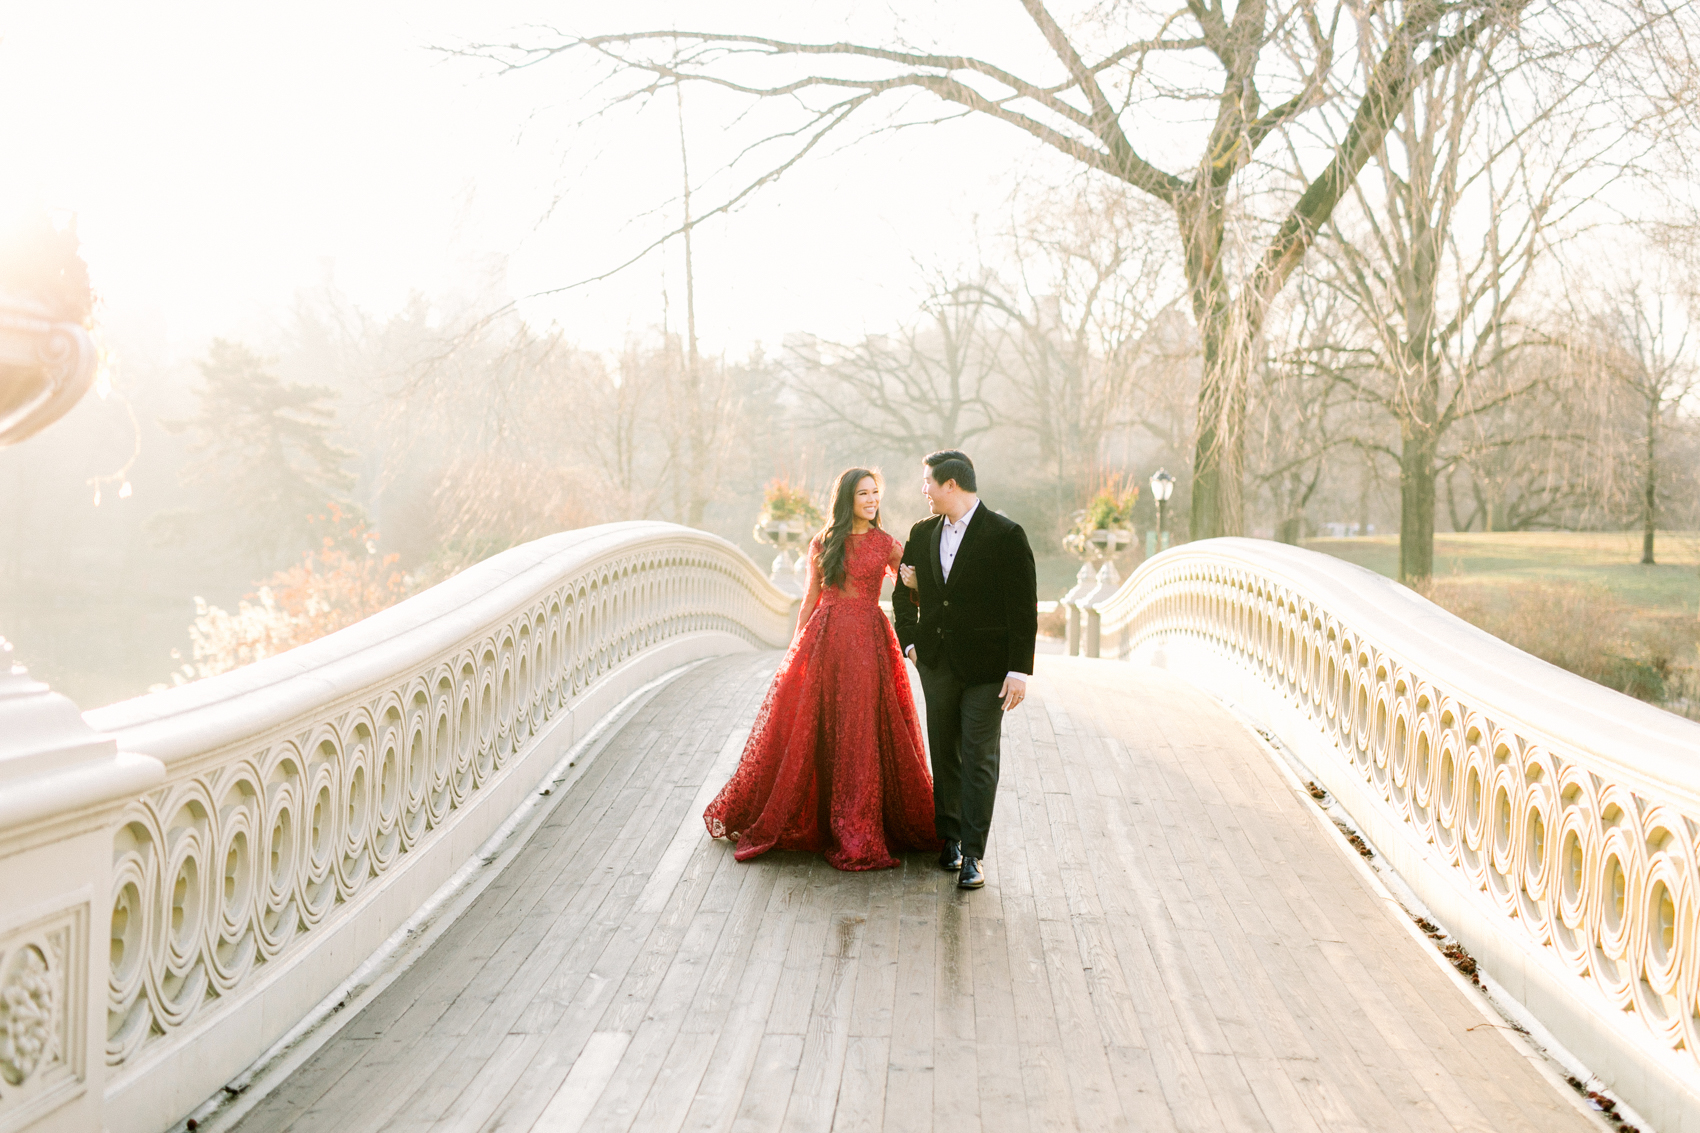 Winter engagement photos shot by Stephanie Sunderland at Bow Bridge in Central Park